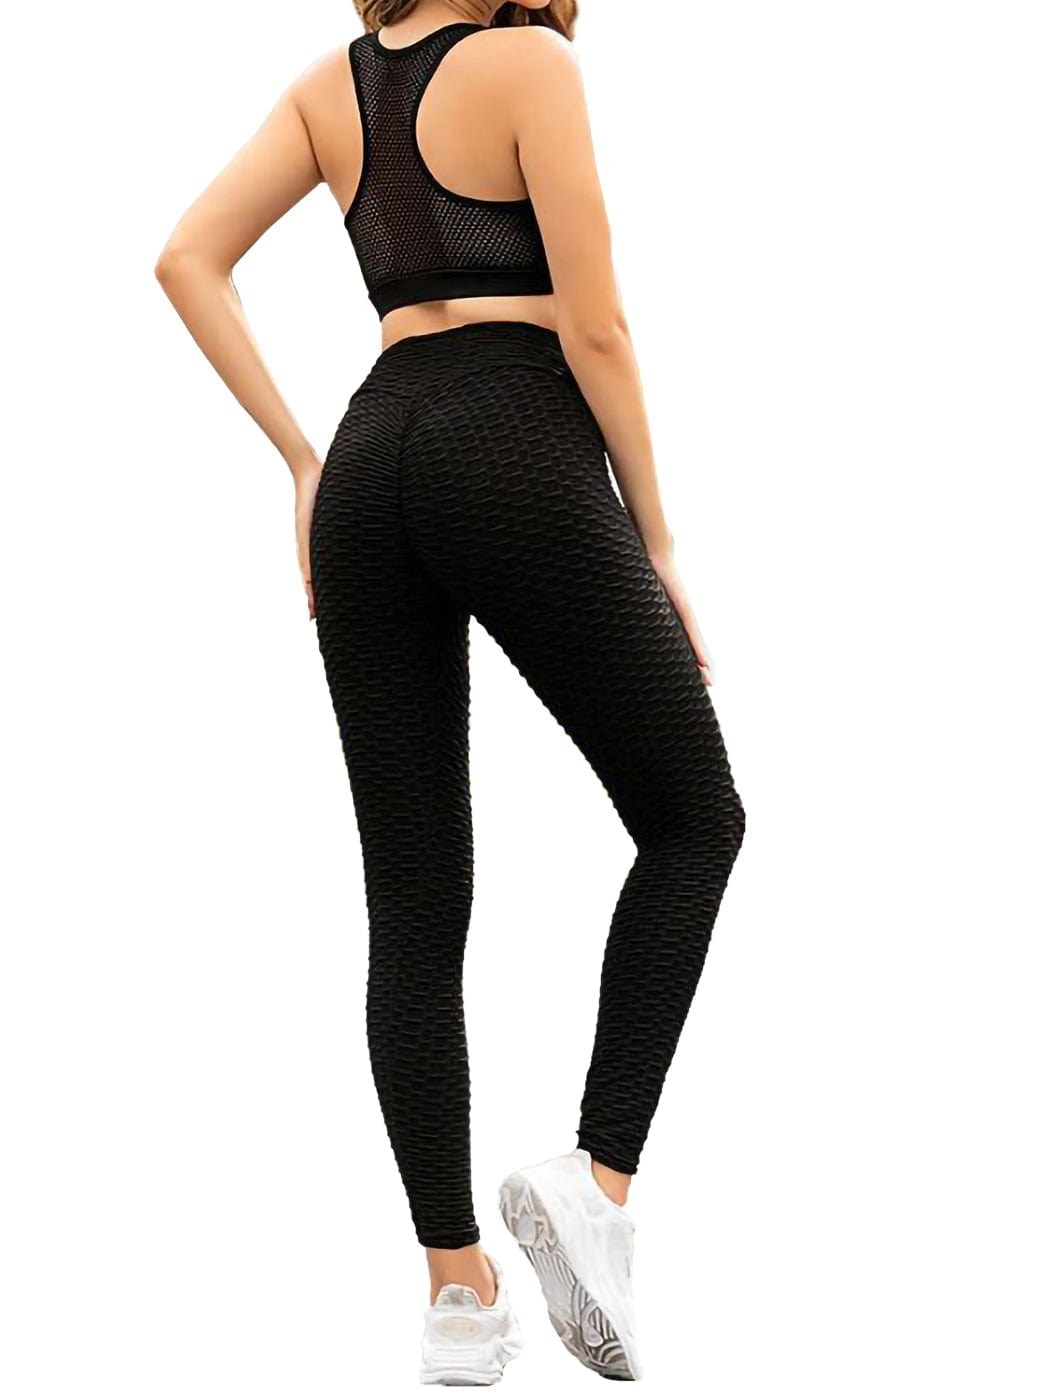 Designer Al Yoga Hot Leggings Outfits And Pants Set With Twisted Bra And  High Waist Pleated Tight Pants For Women From Zhangjungang1, $38.93